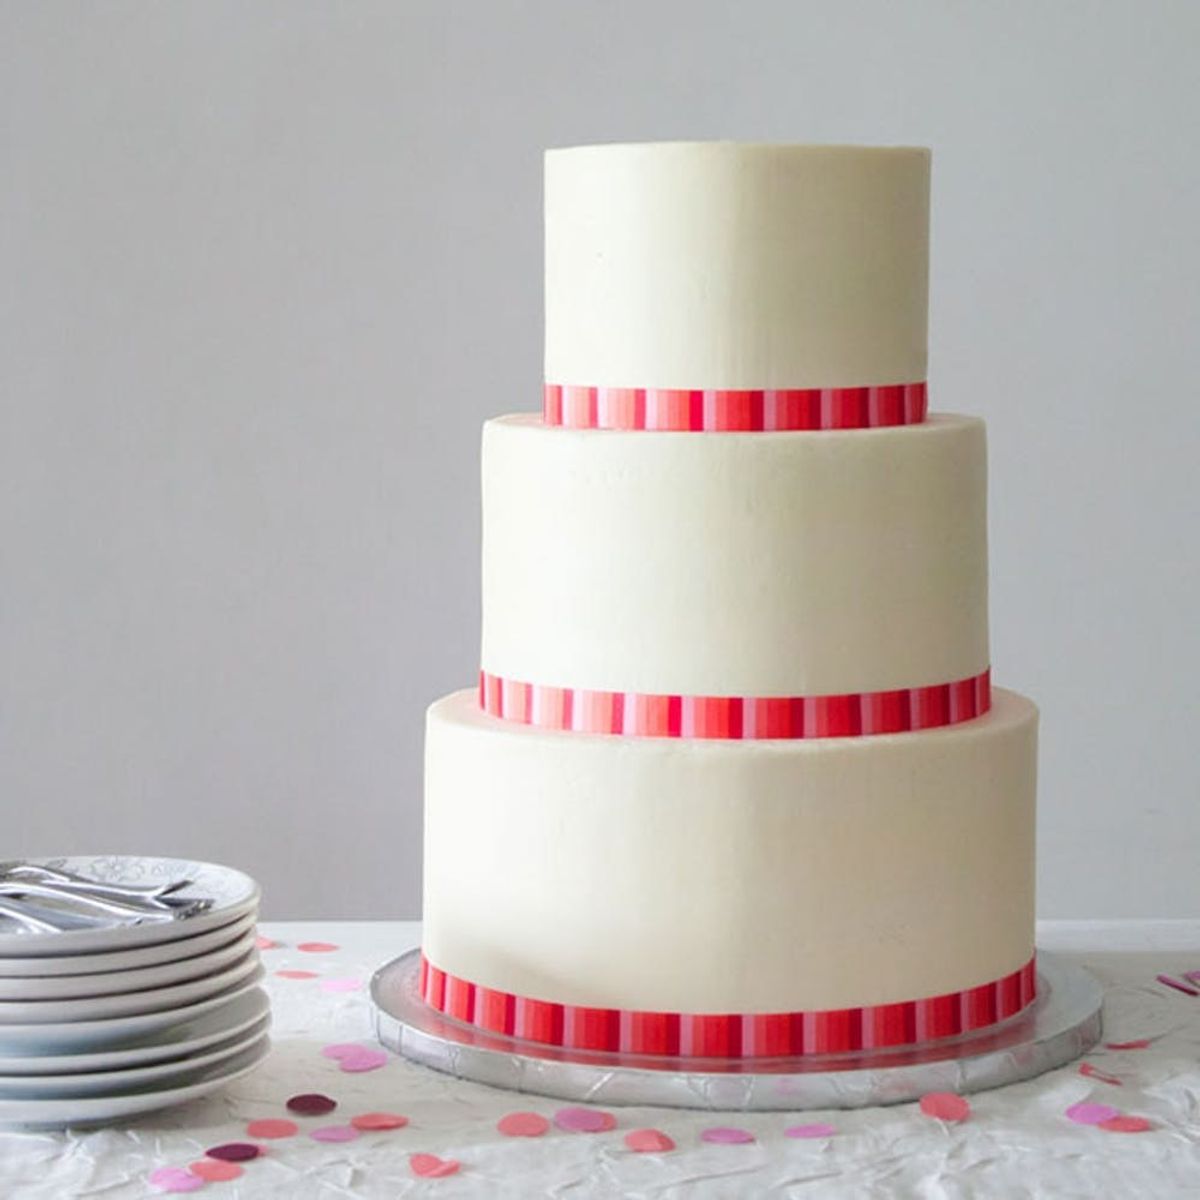 How to Stack a Wedding Cake Like a Pro